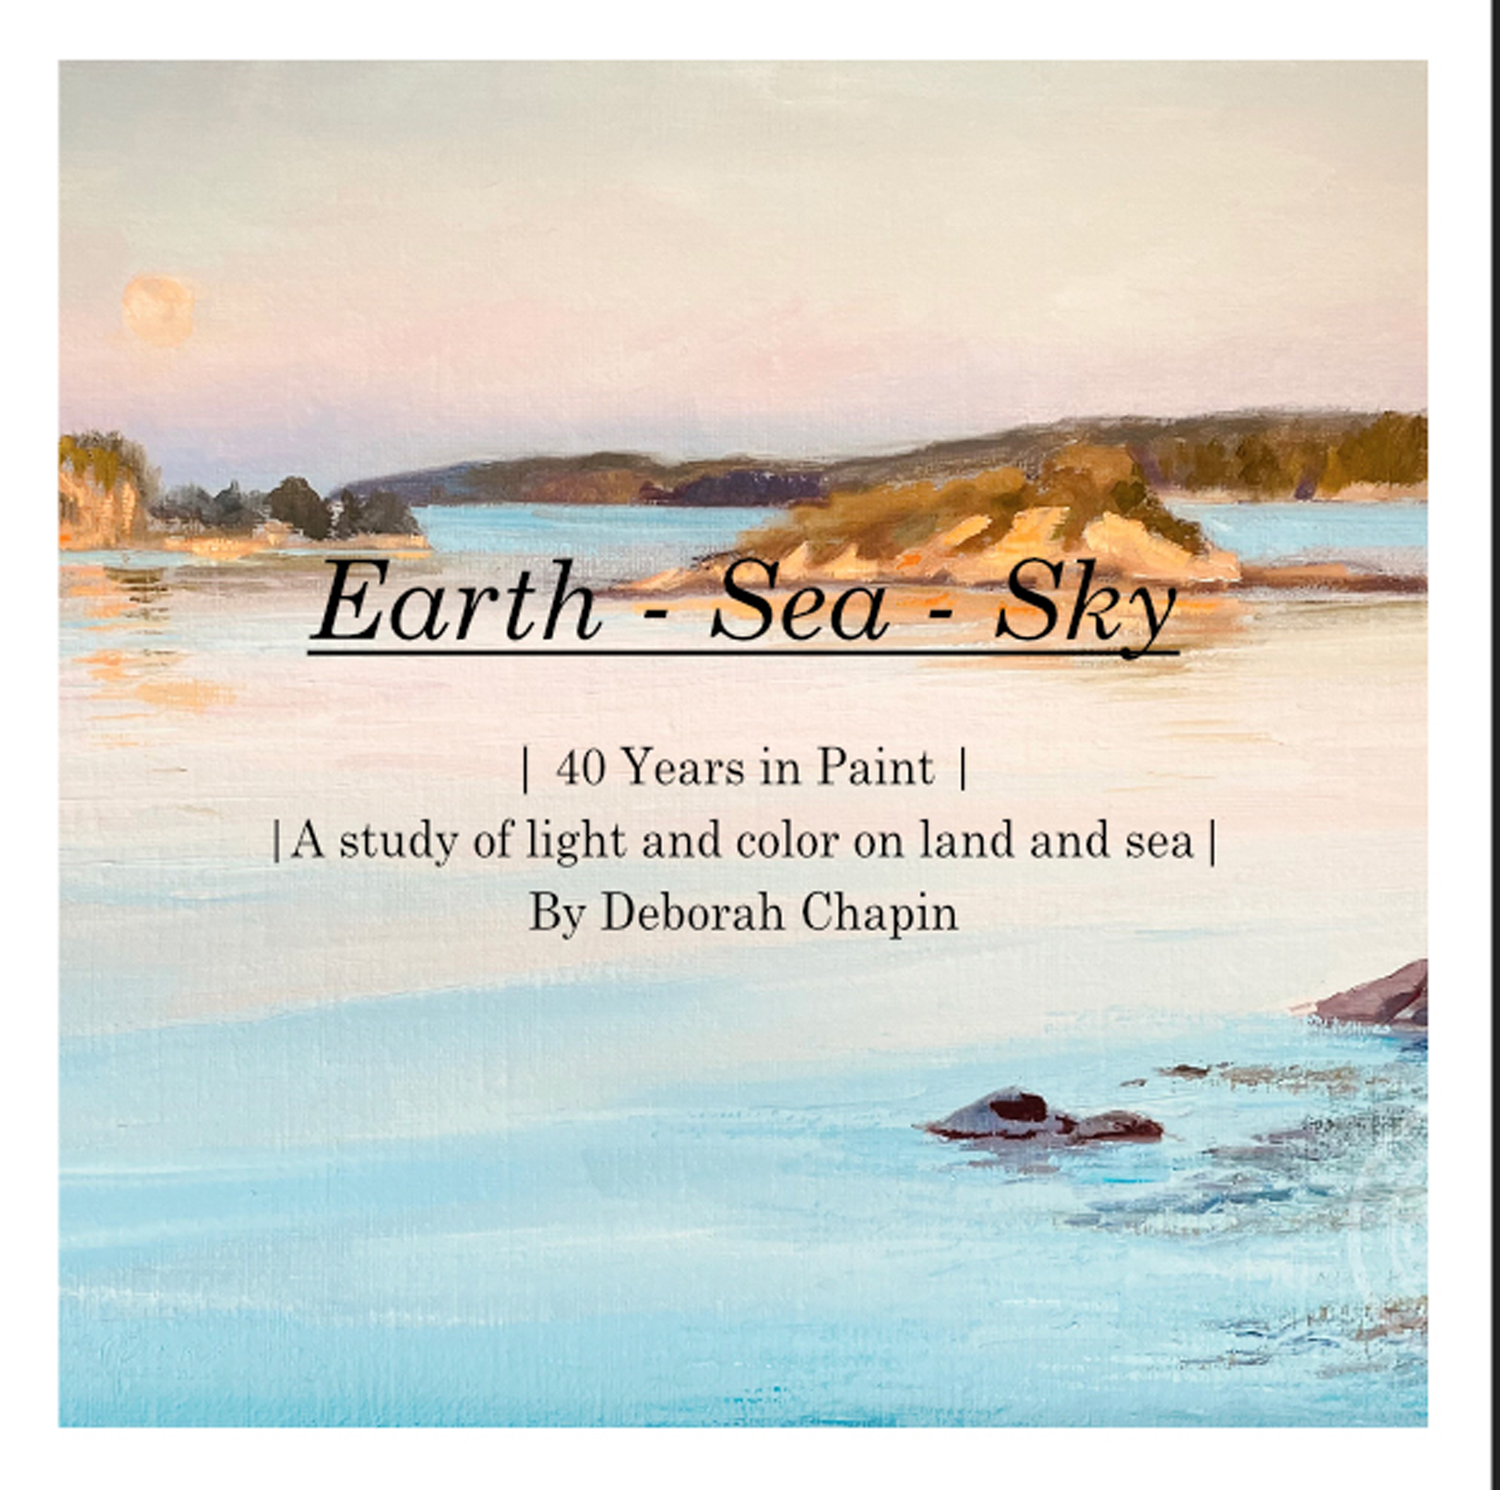 New Coffee Table Book / Exhibit Catalog – Earth Sea and Sky